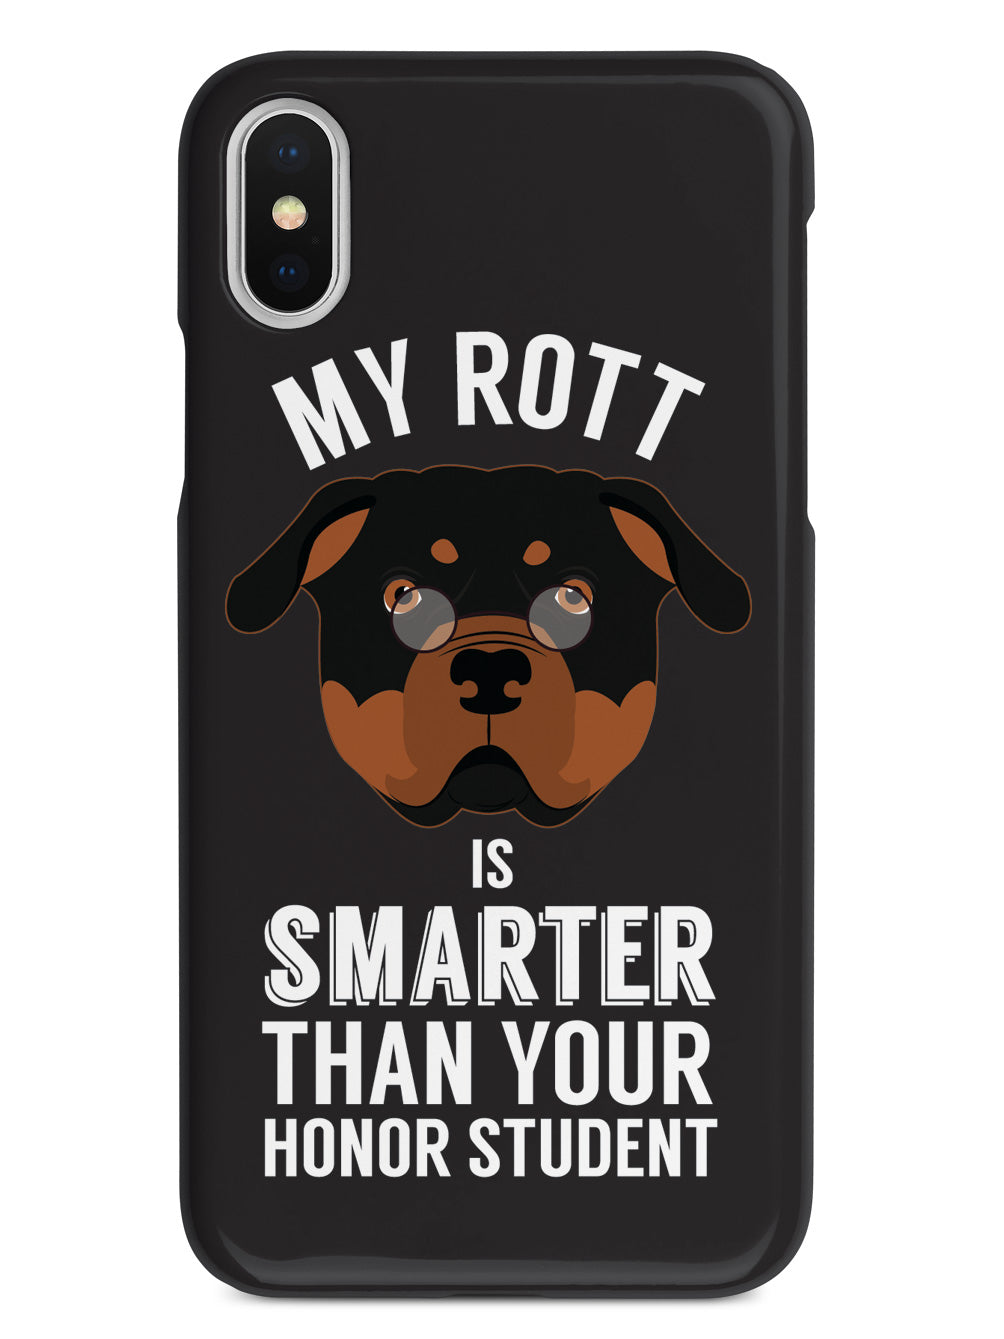 Smarter Than Your Honor Student - Rott Case